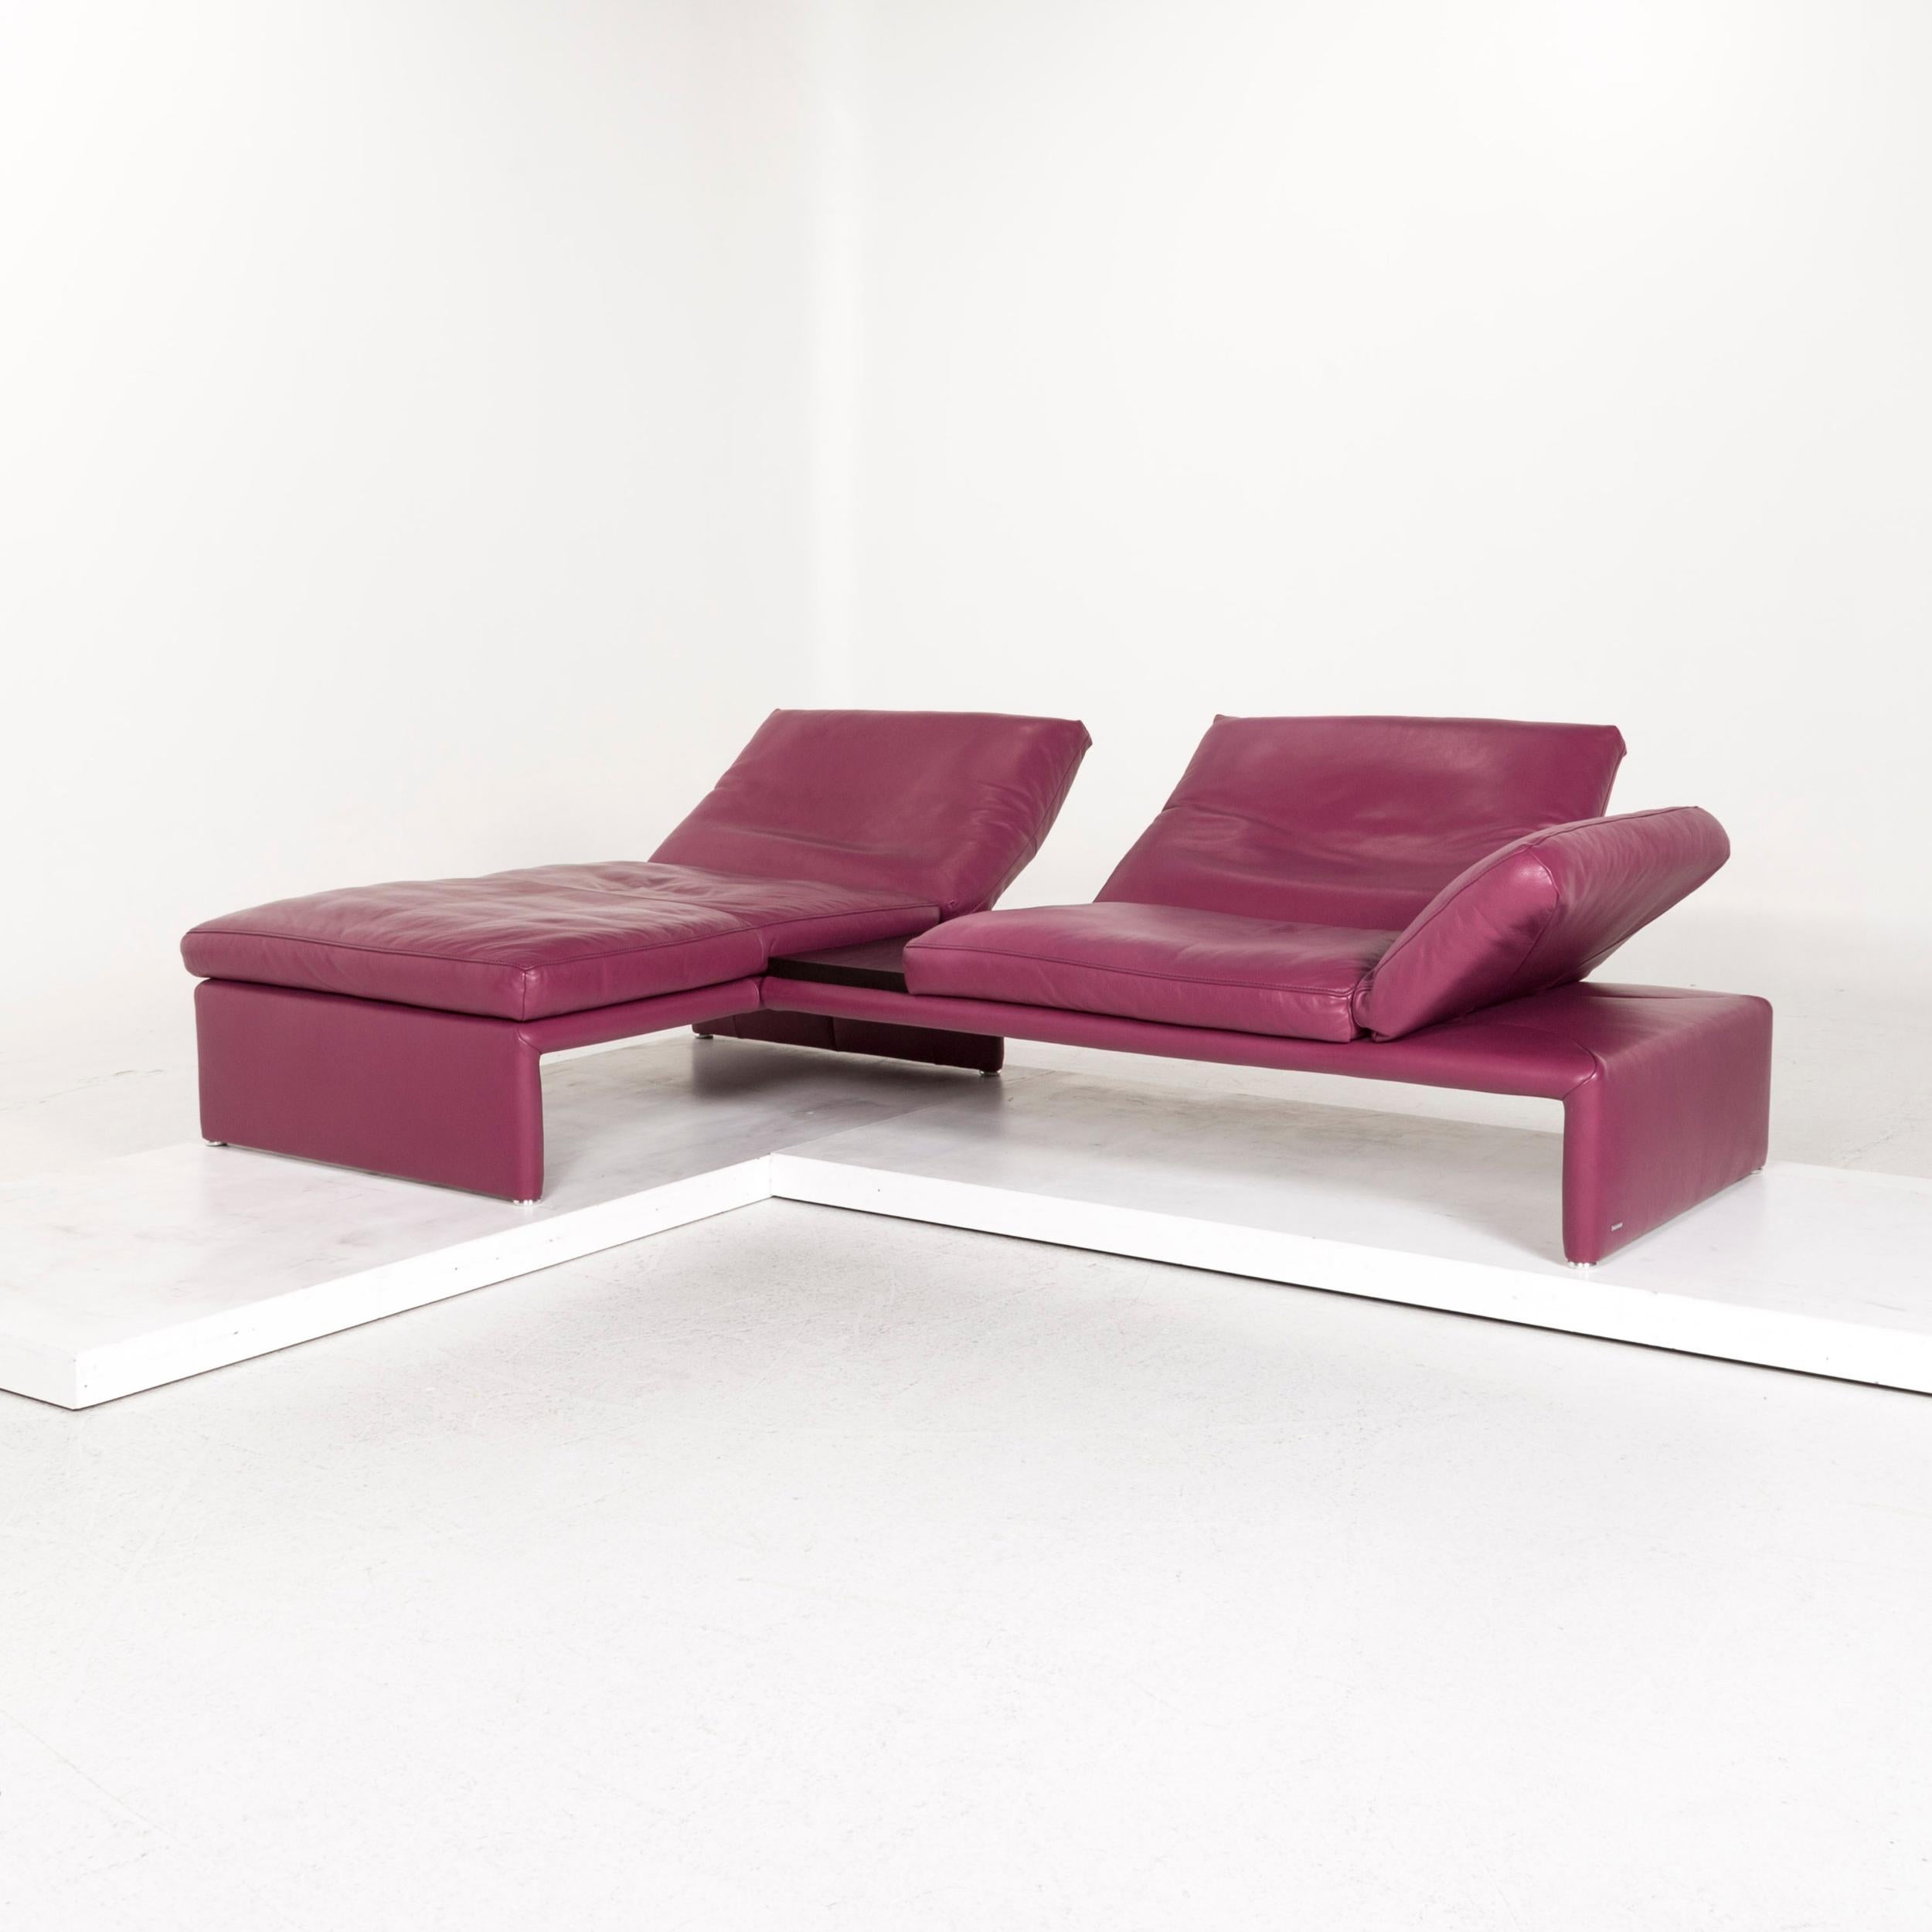 We bring to you a Koinor Raoul leather corner sofa purple sofa function couch.

 

 Product measurements in centimeters:
 

Depth 97
Width 157
Height 96
Seat-height 44
Rest-height 44
Seat-depth 63
Seat-width 93
Back-height 49.
   